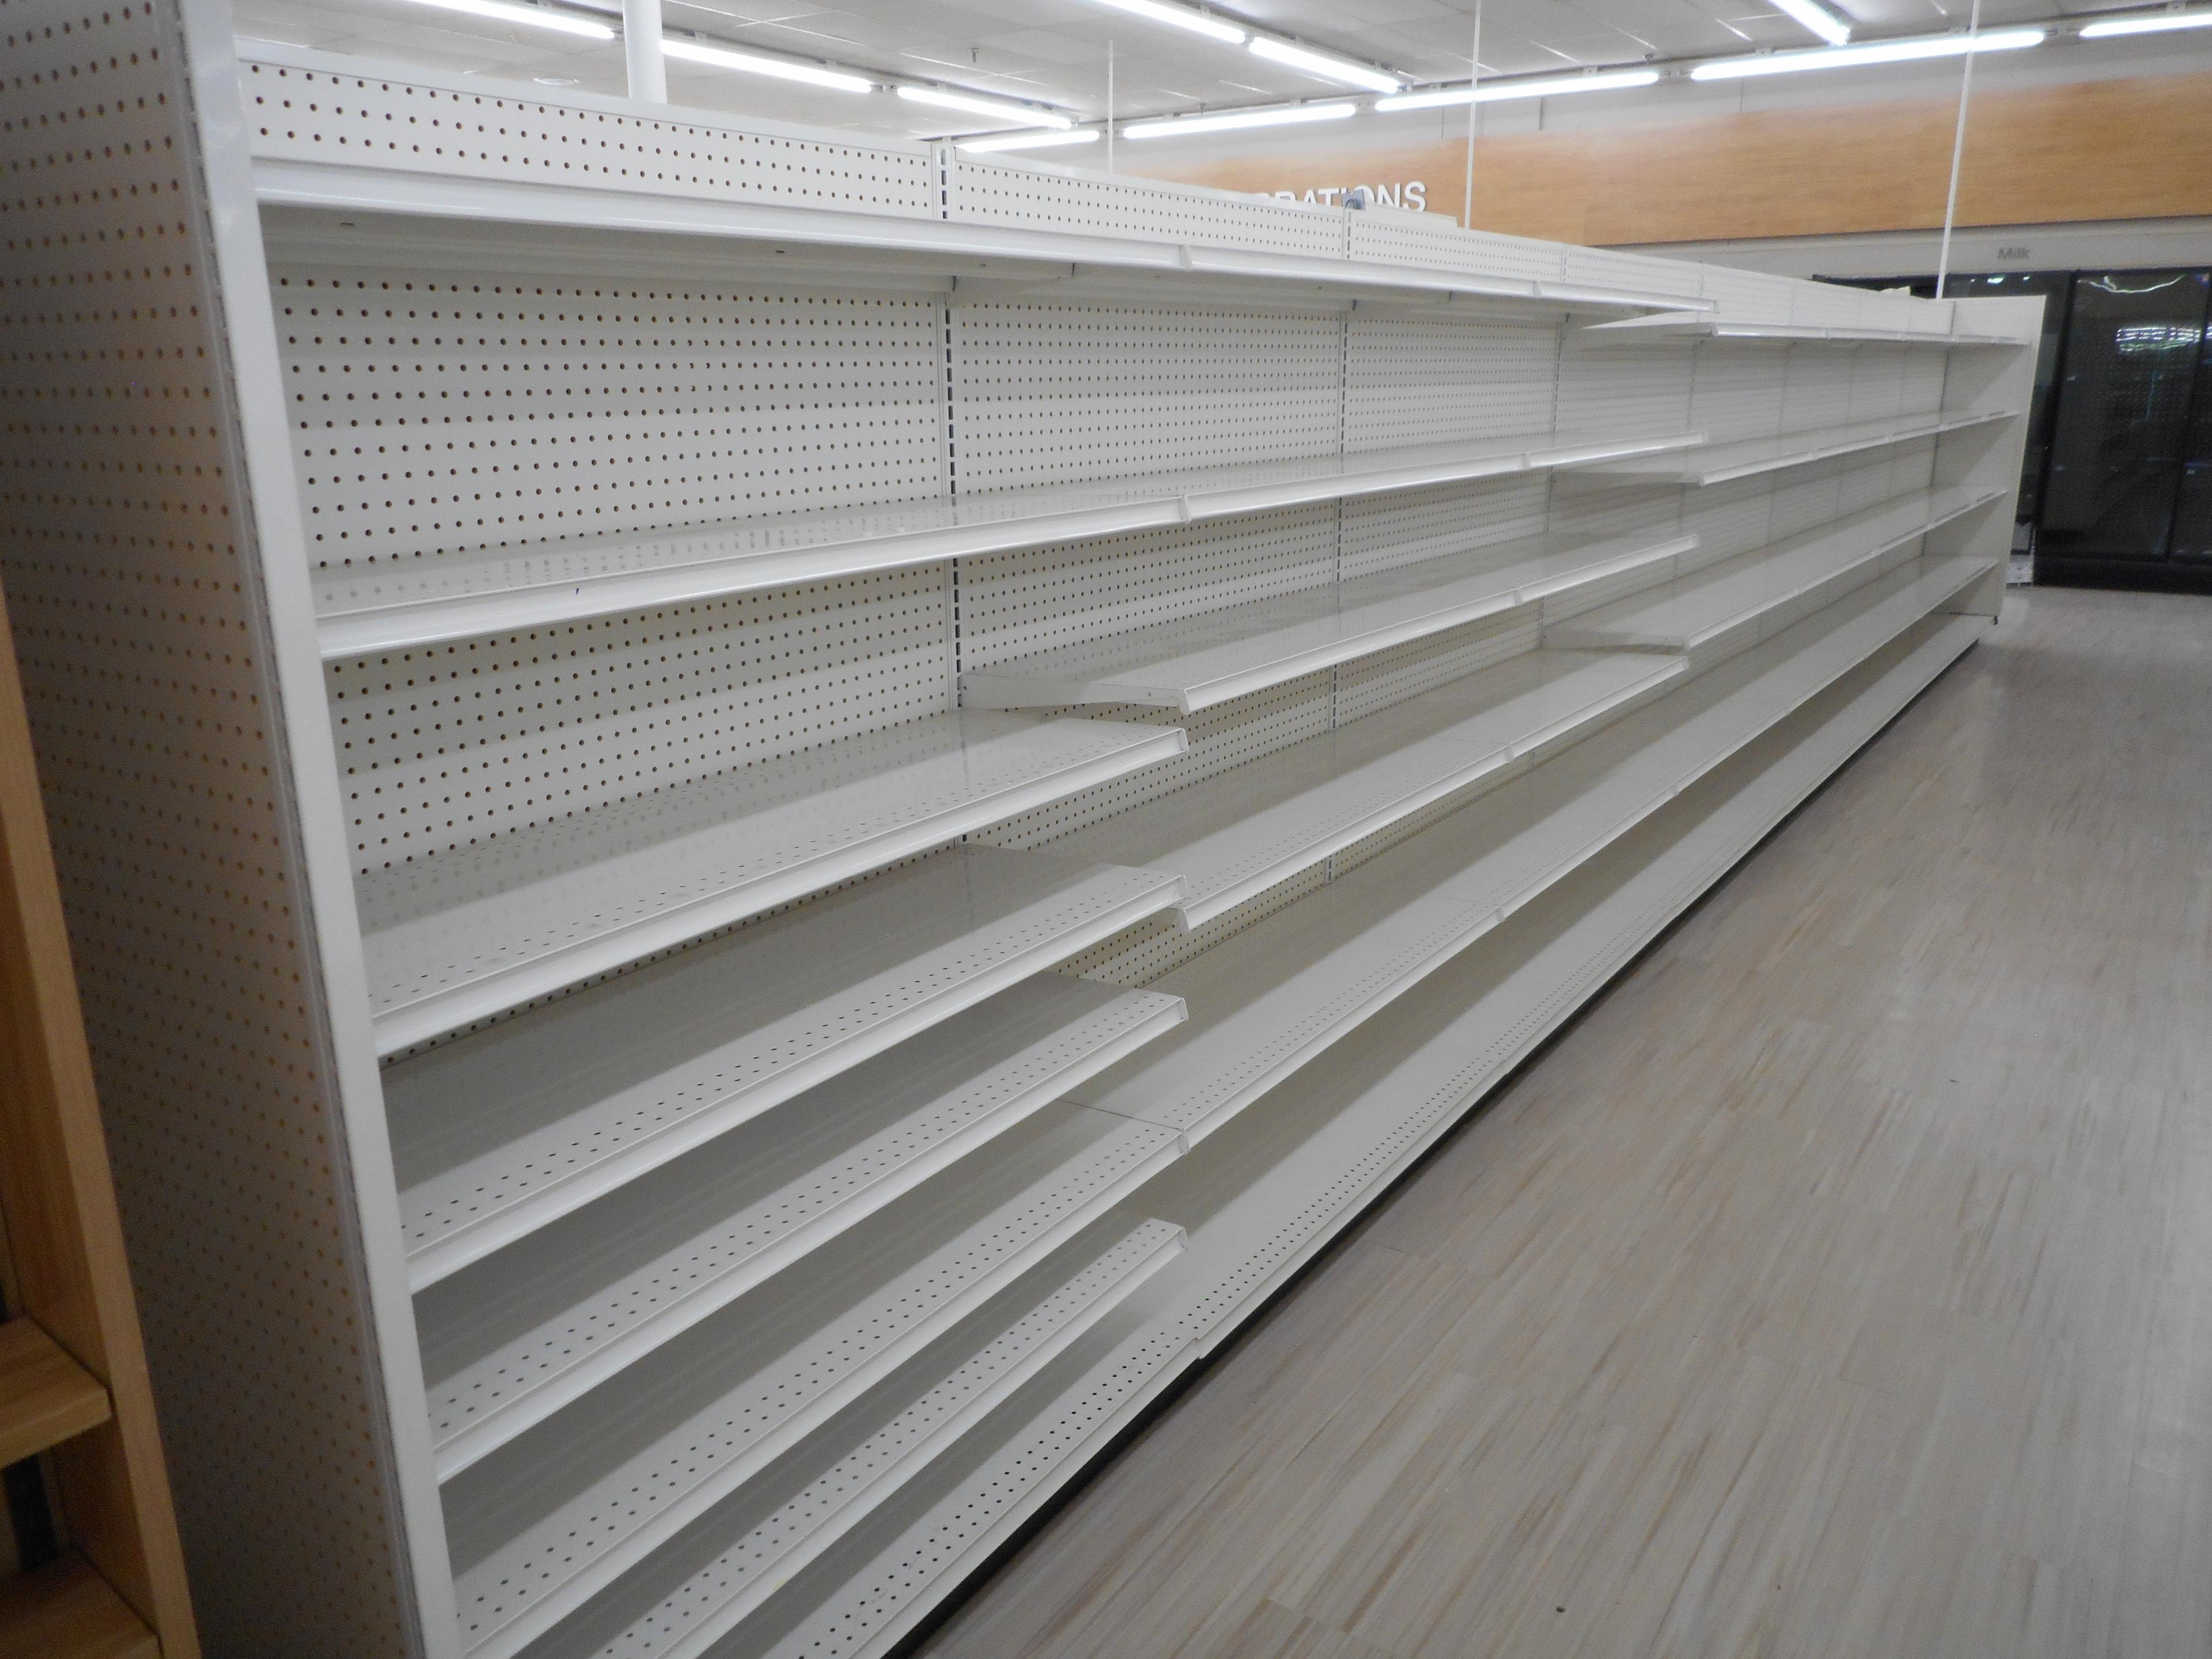 32 FT 2-SIDED WHITE SHELVING NO END CAP (PRICED PER LINEAR FOOT) 72 INCHES